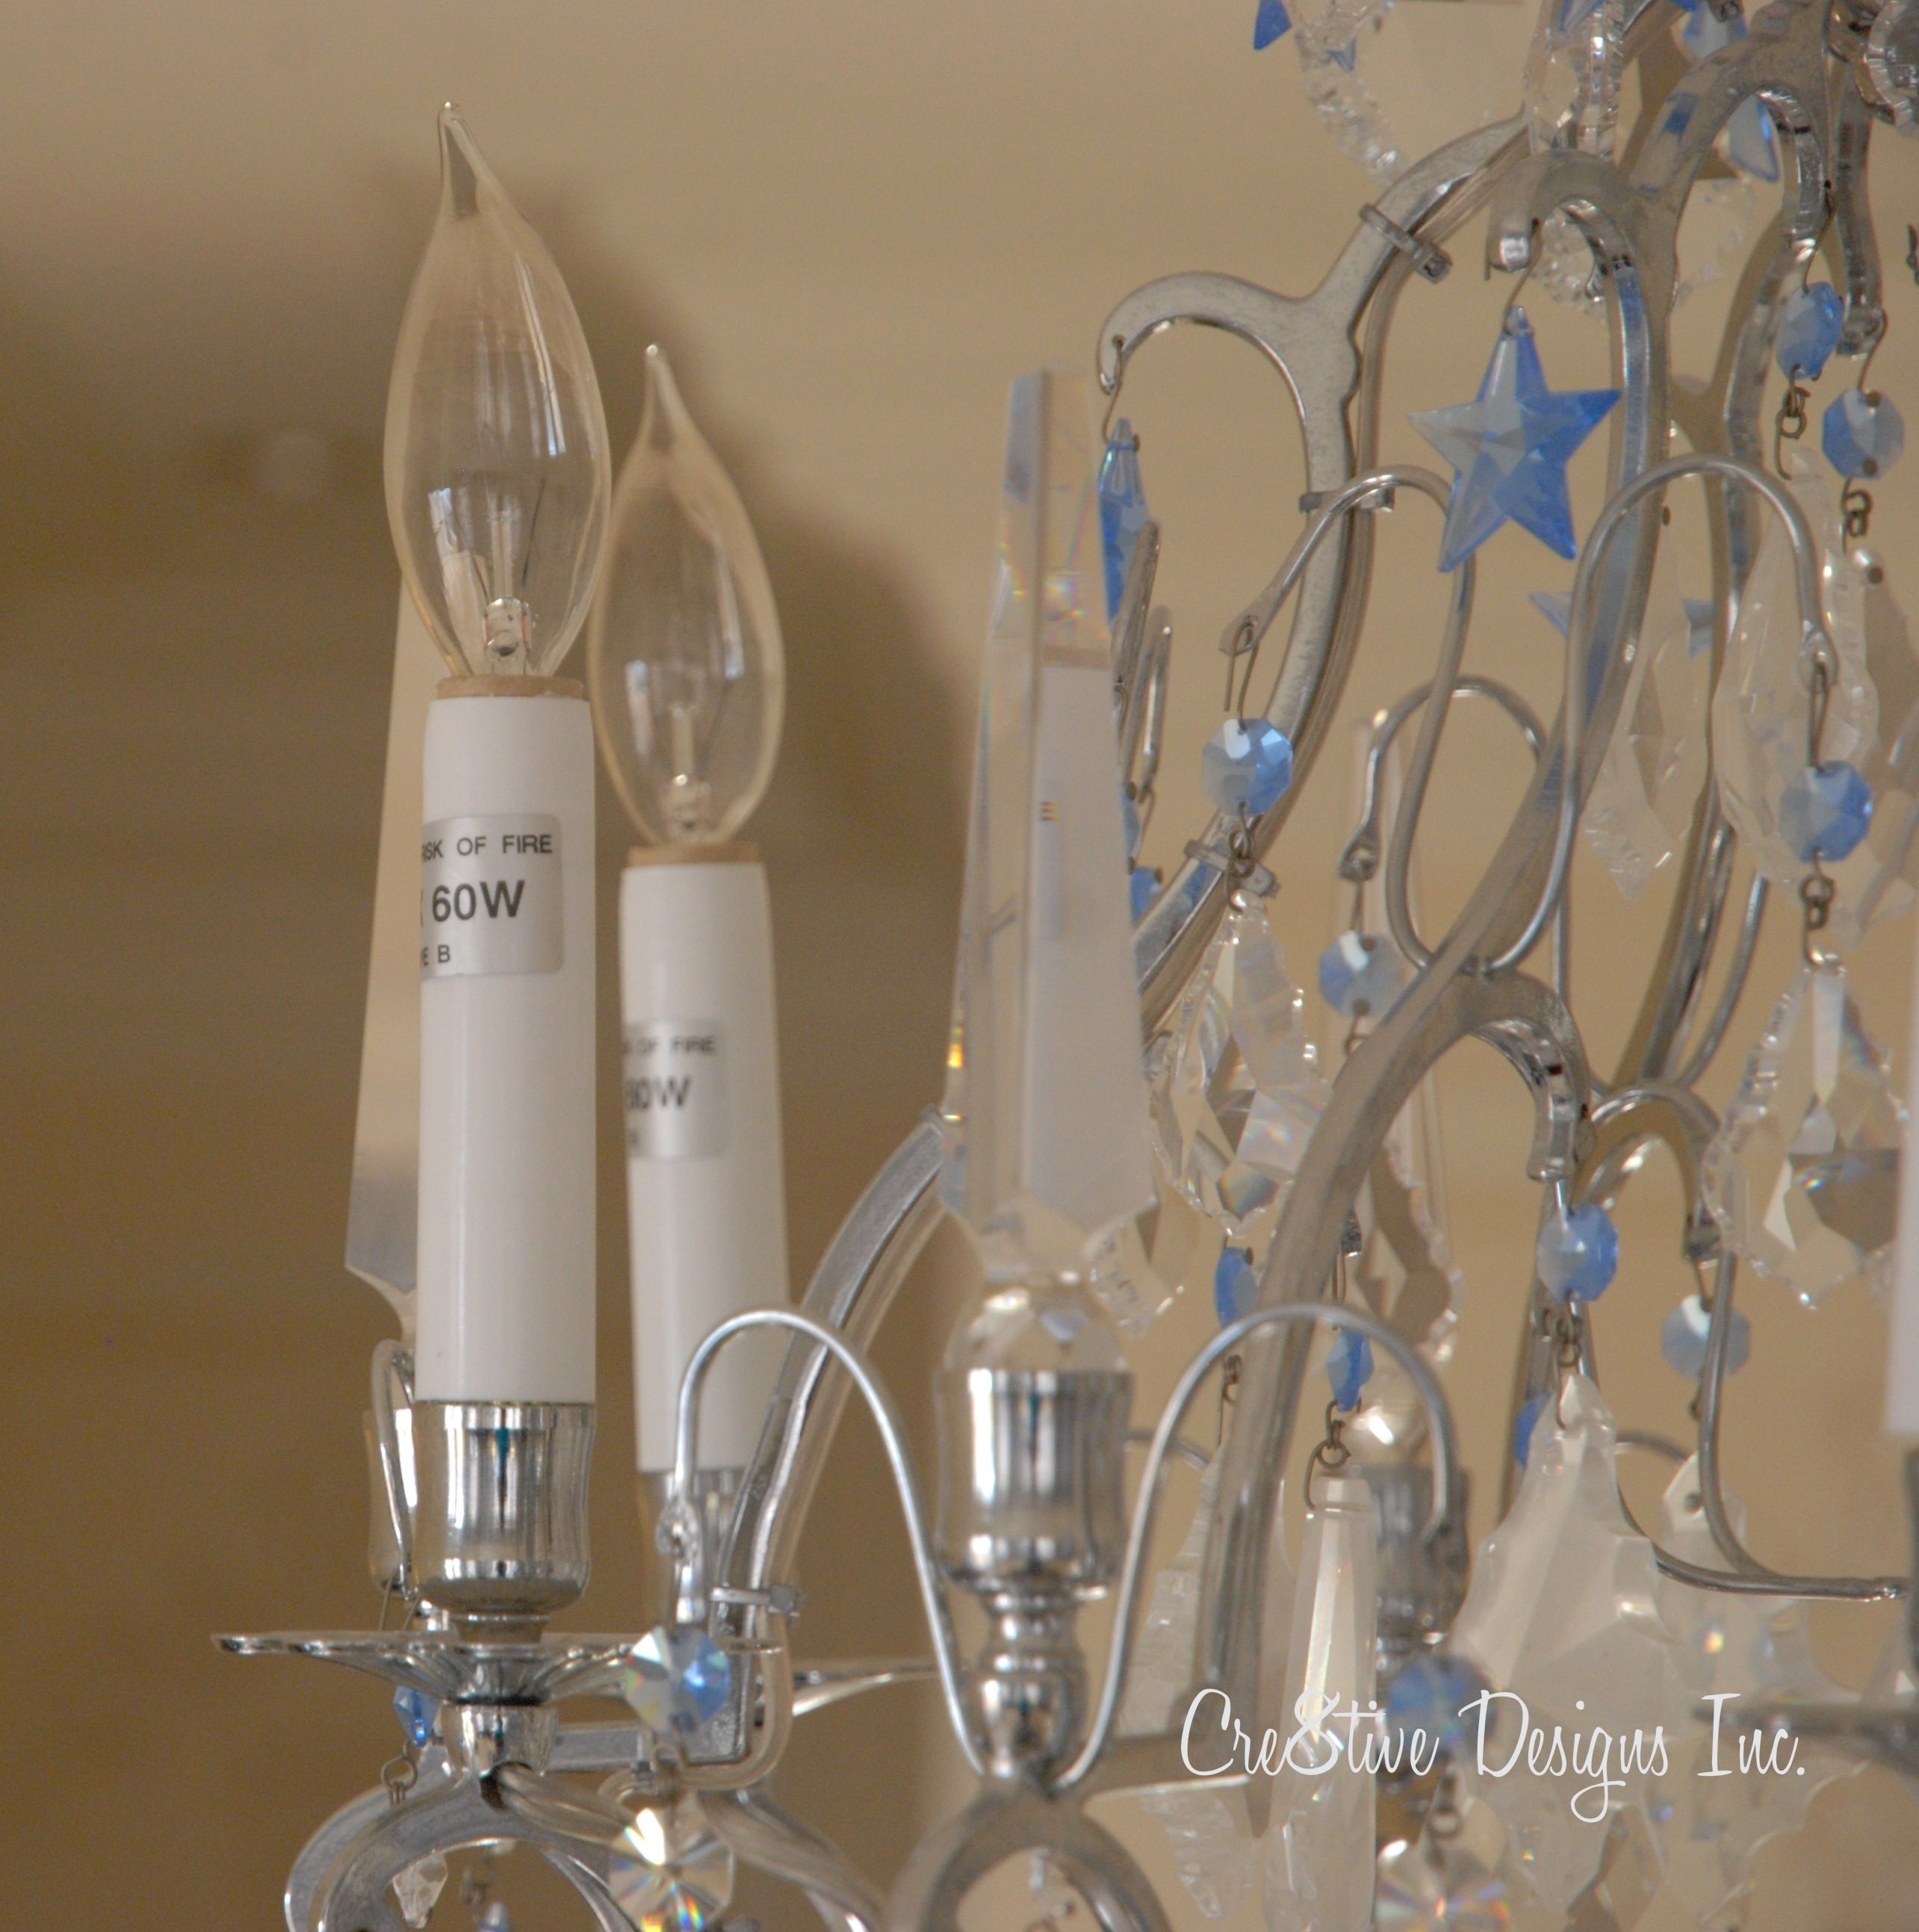 Chandelier Ideas Candle Sleeves For Chandeliers Chandeliers Inside Chandelier Accessories (View 7 of 12)